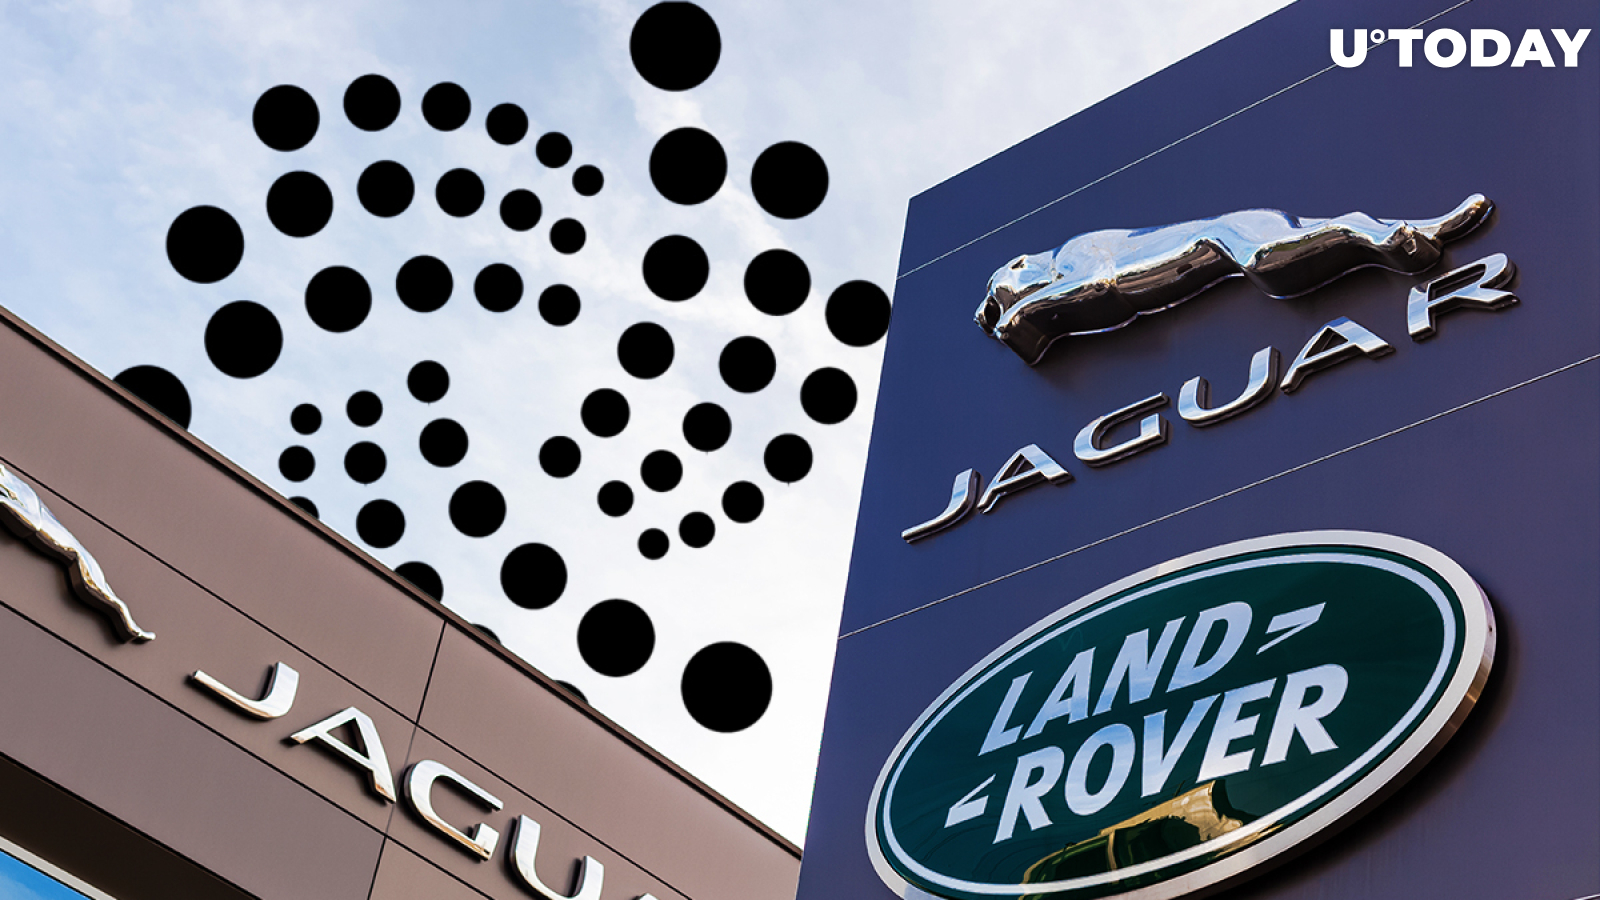 IOTA Unveils New Product Together with Jaguar Land Rover and STMicroelectronics